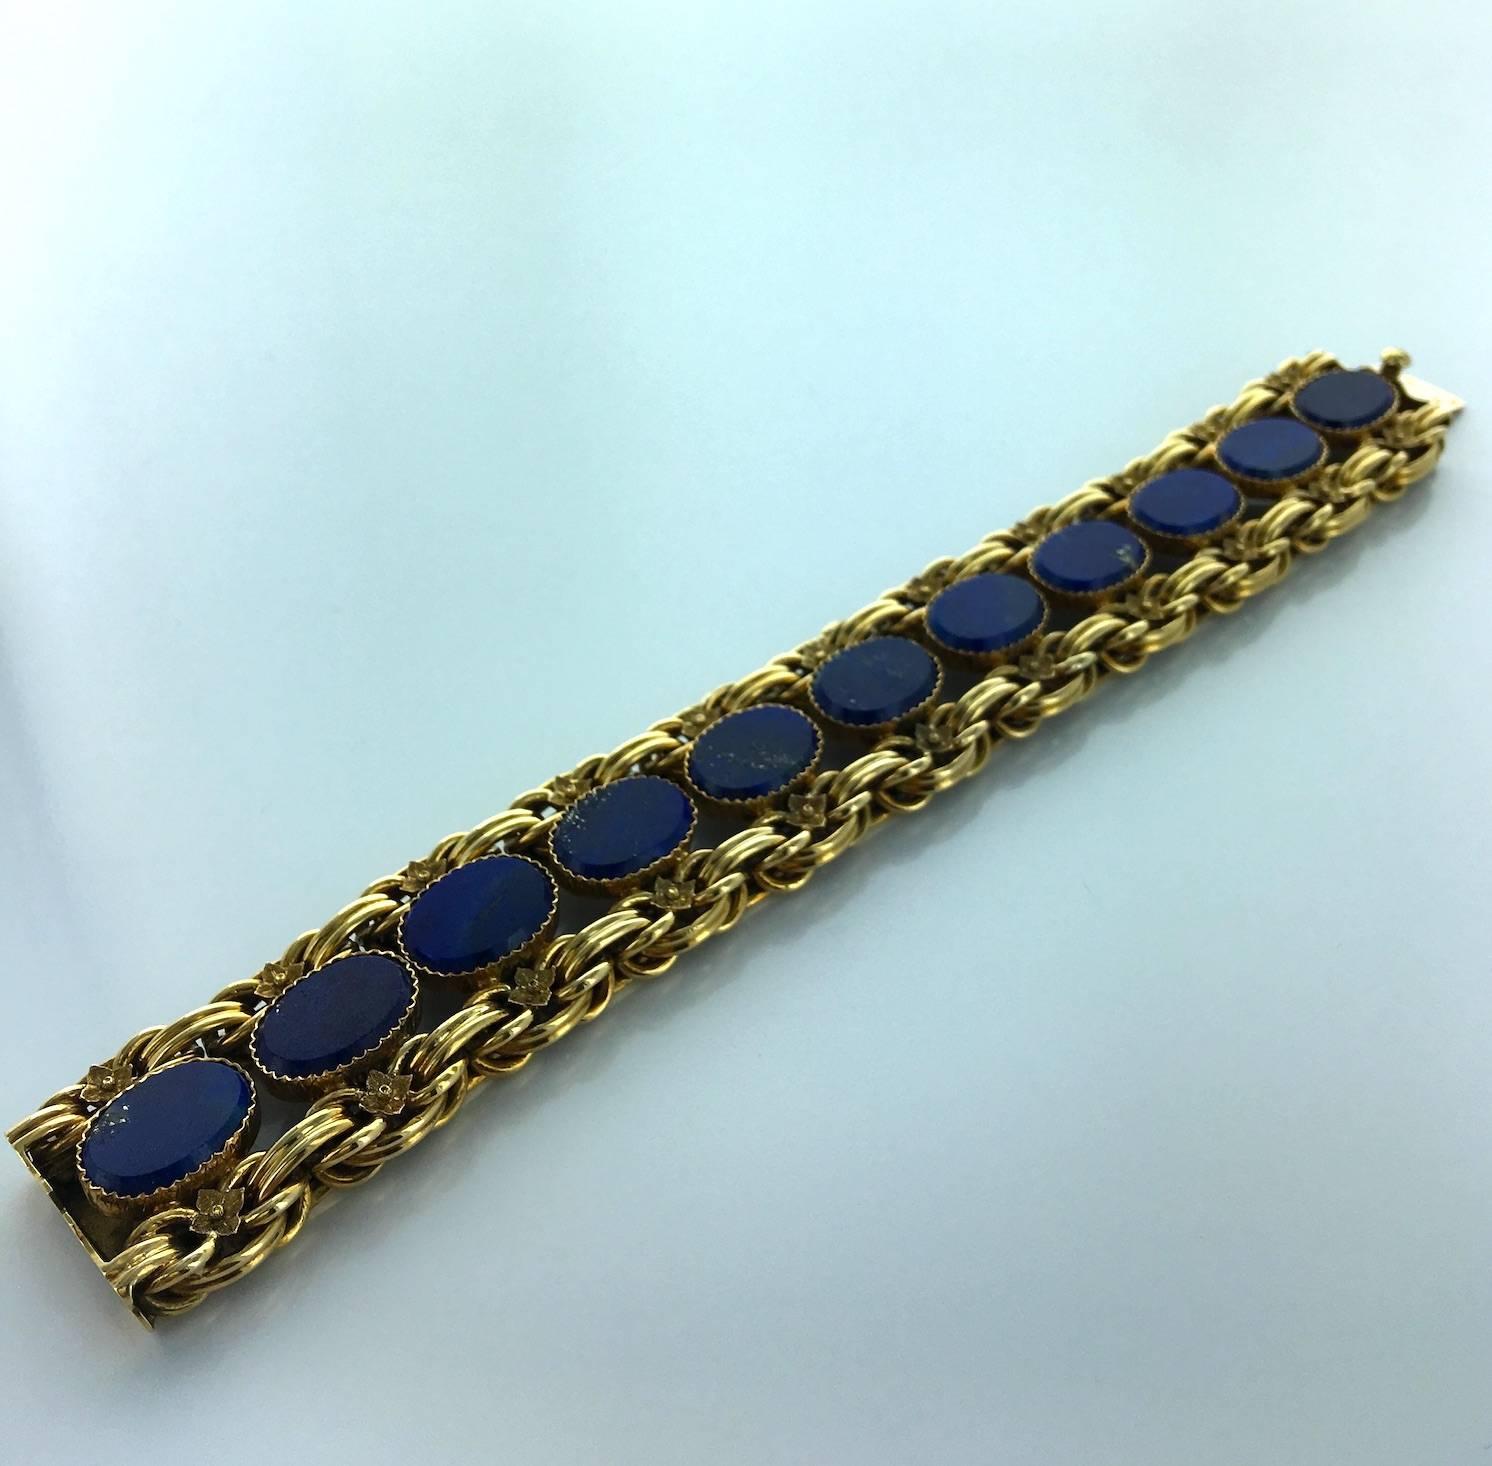 A yellow gold and lapis lazuli Victorian bracelet in its fitted case.
French marks and maker's mark P.P.
XIXth Century

Measures:
Length: 20 cm (7.9 inches)
Width: 3 cm (1.2 inches)

Total weight: 76.00 grams.